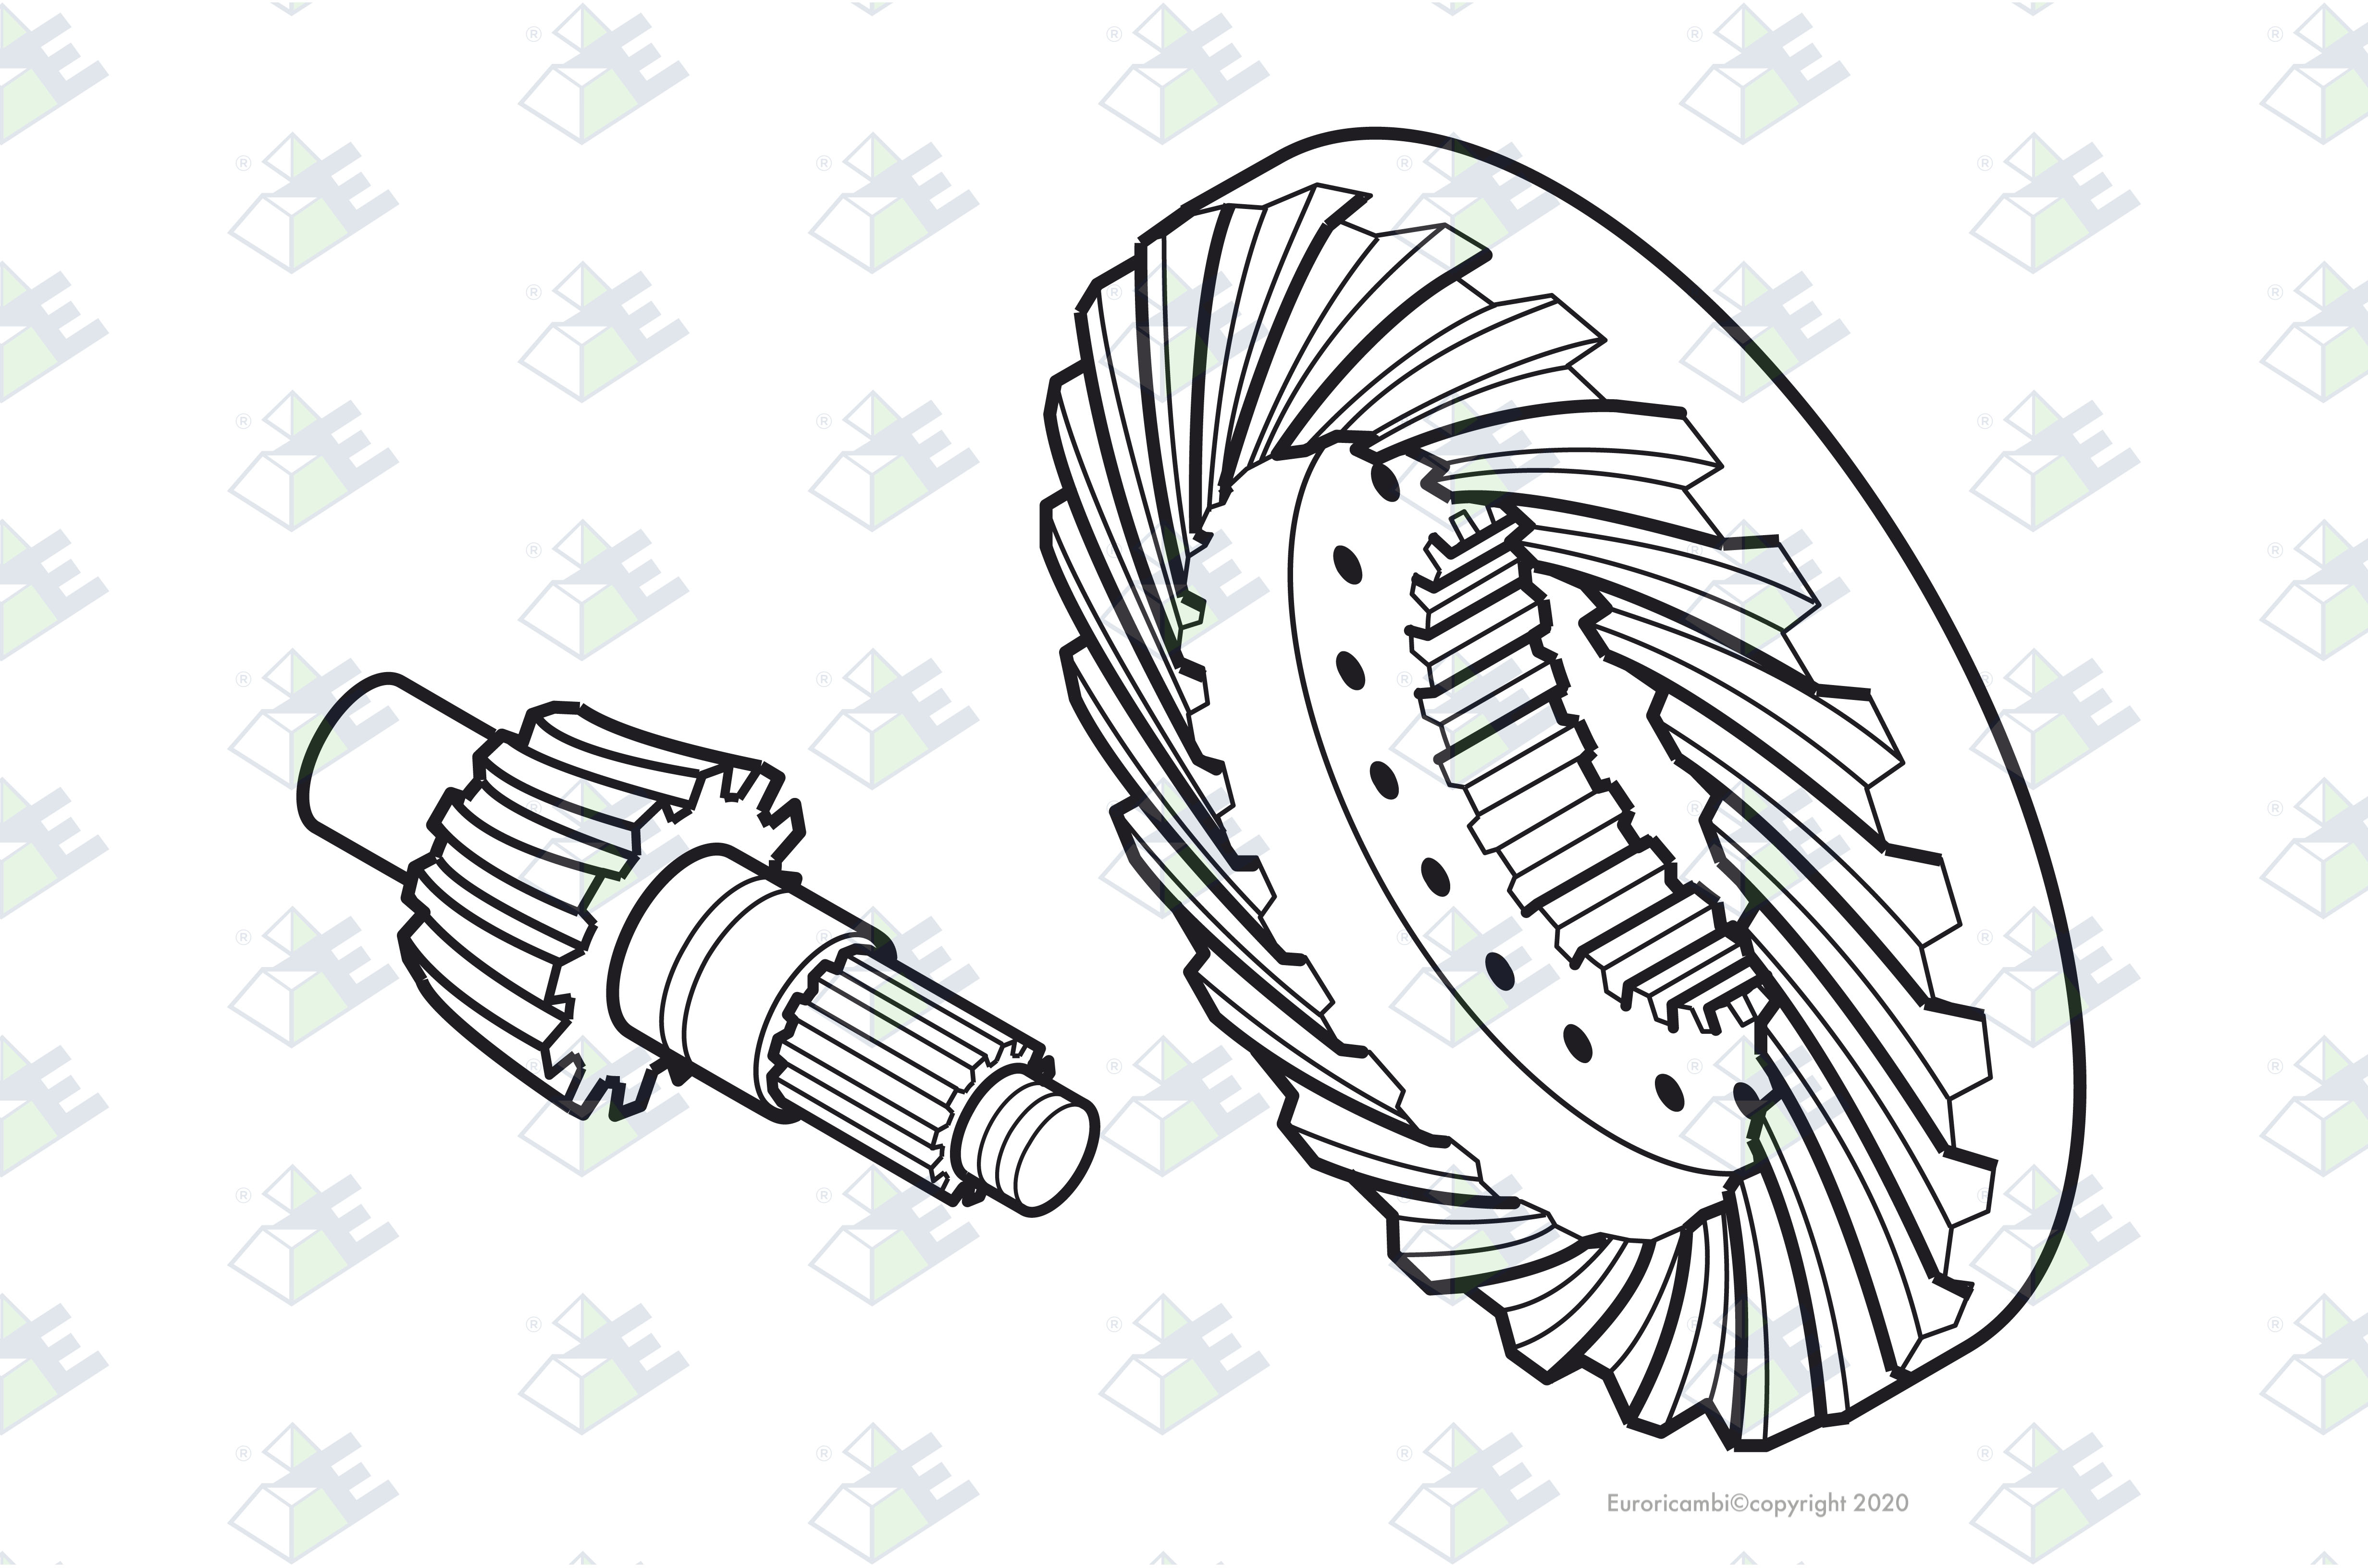 CROWN WHEEL/PINION 39:7 suitable to AM GEARS 67037